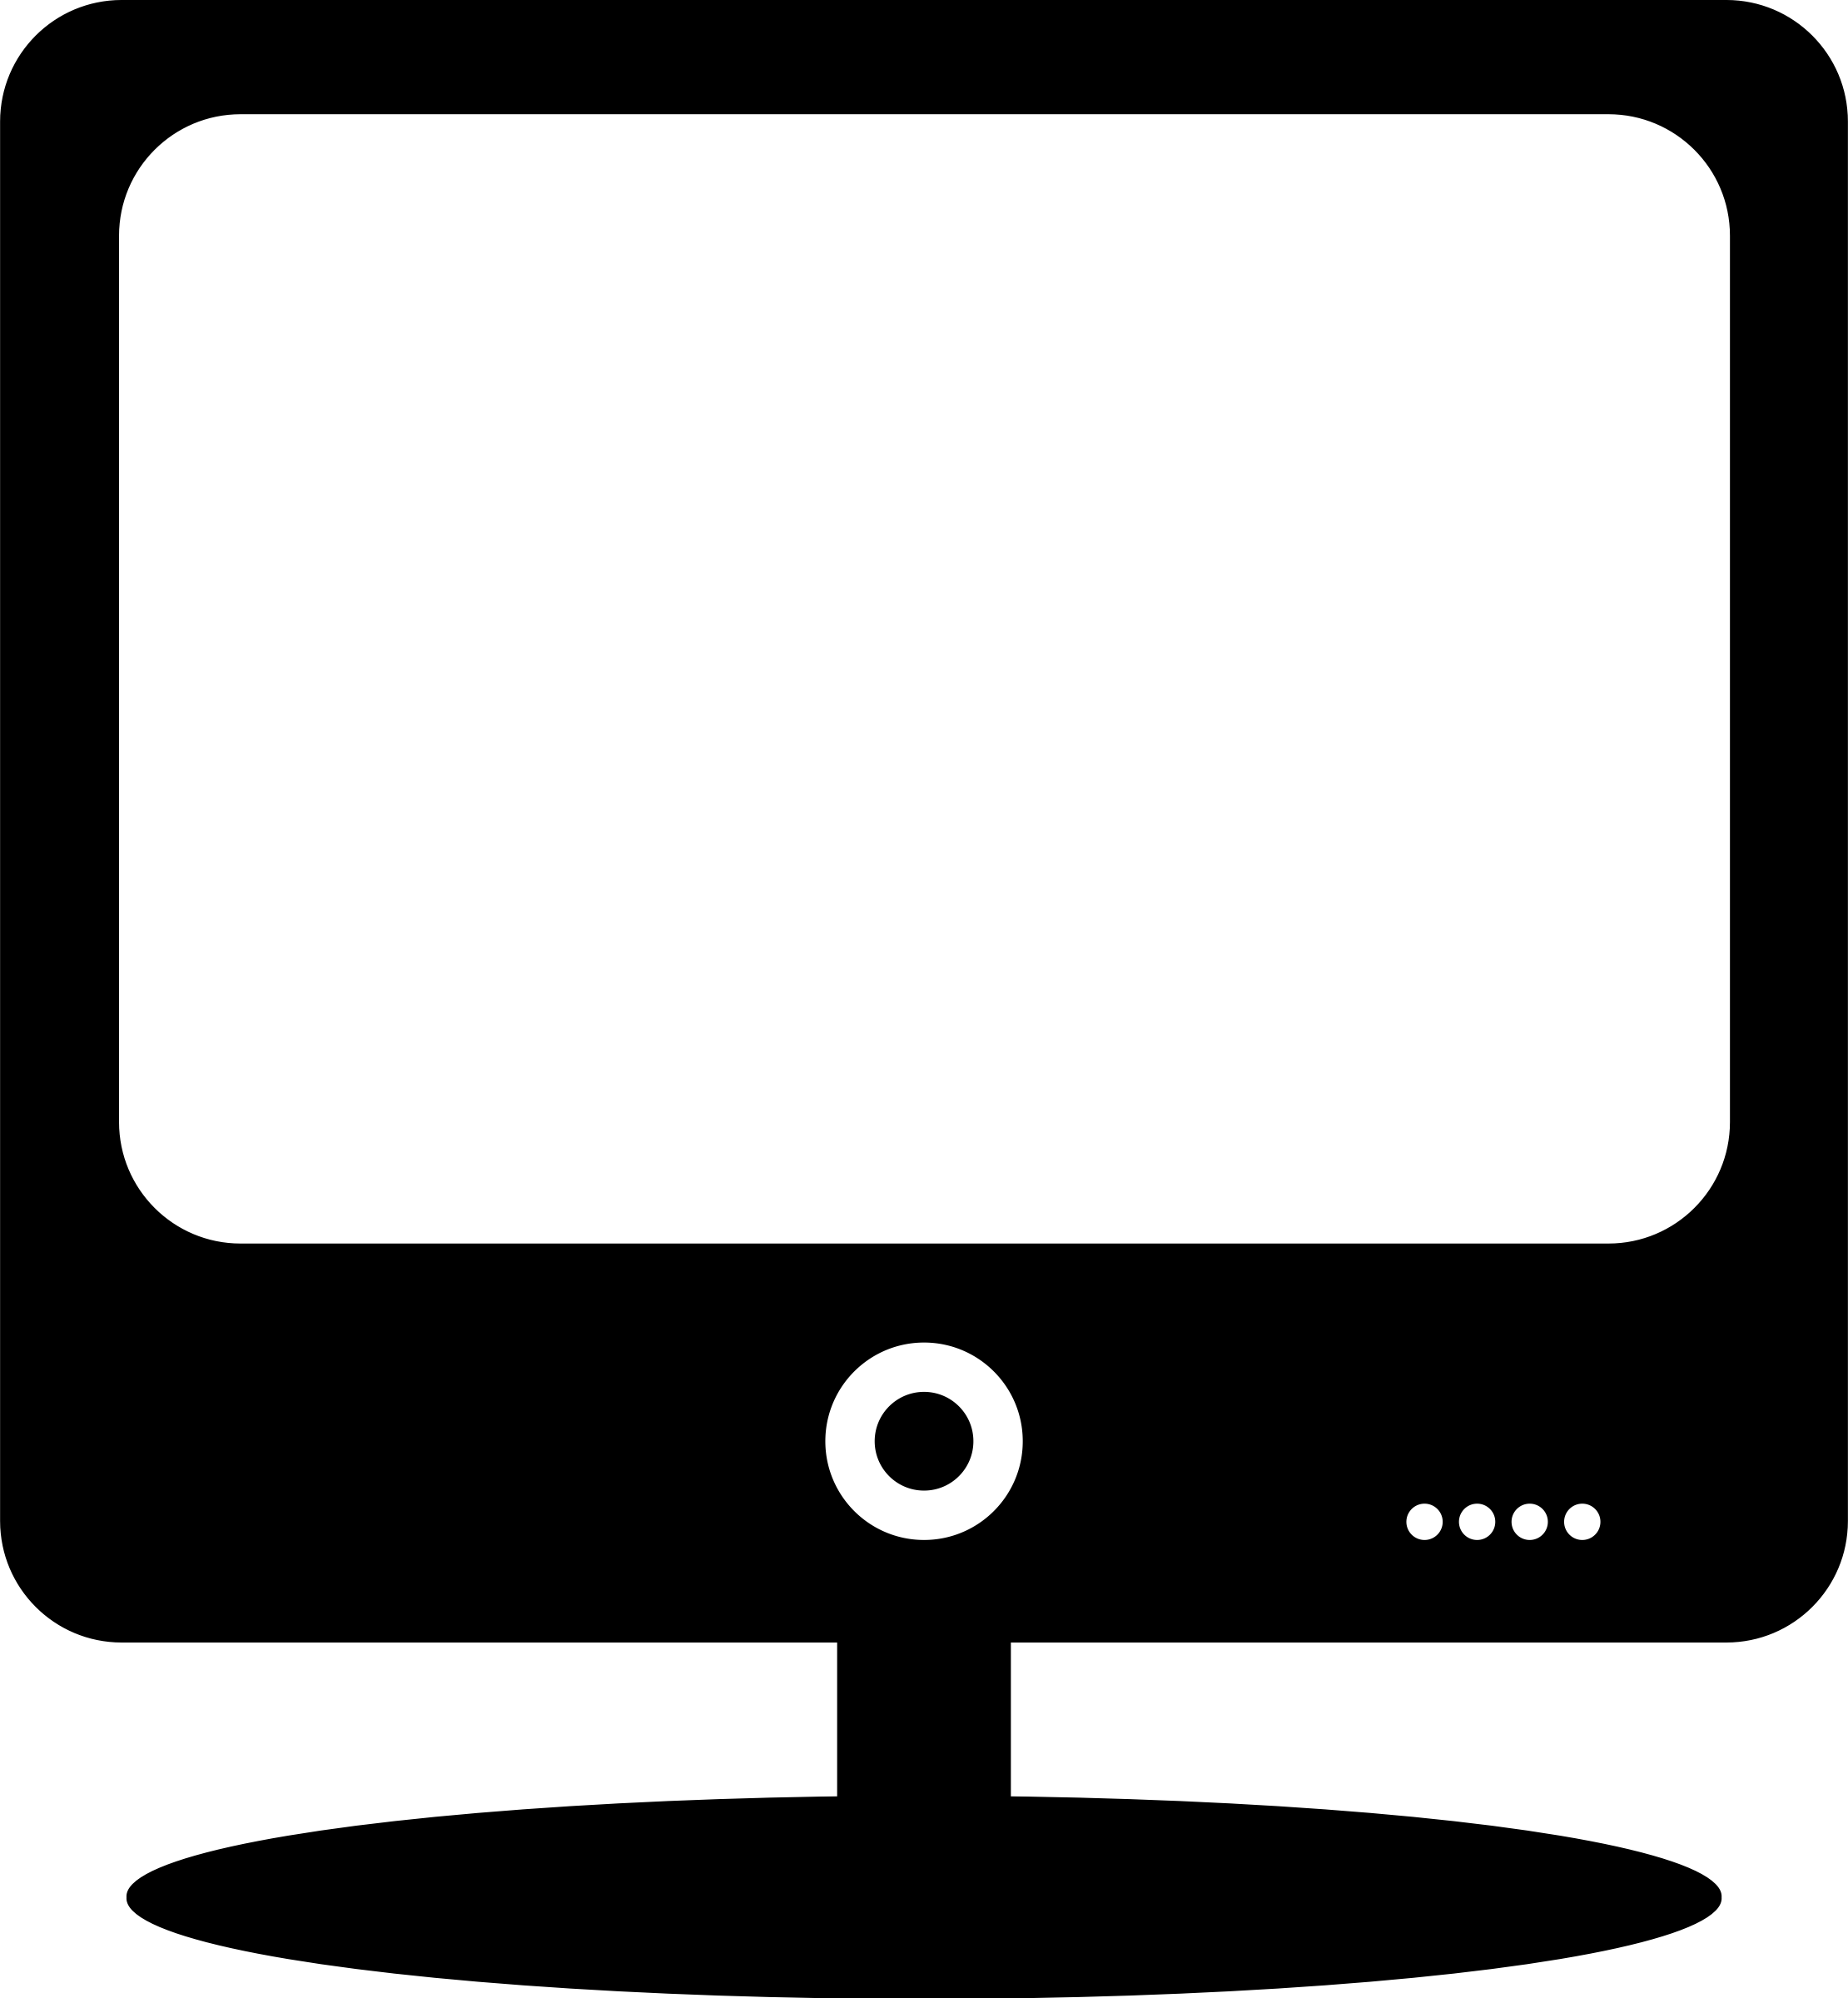 Computer Monitor Clipart Black And White